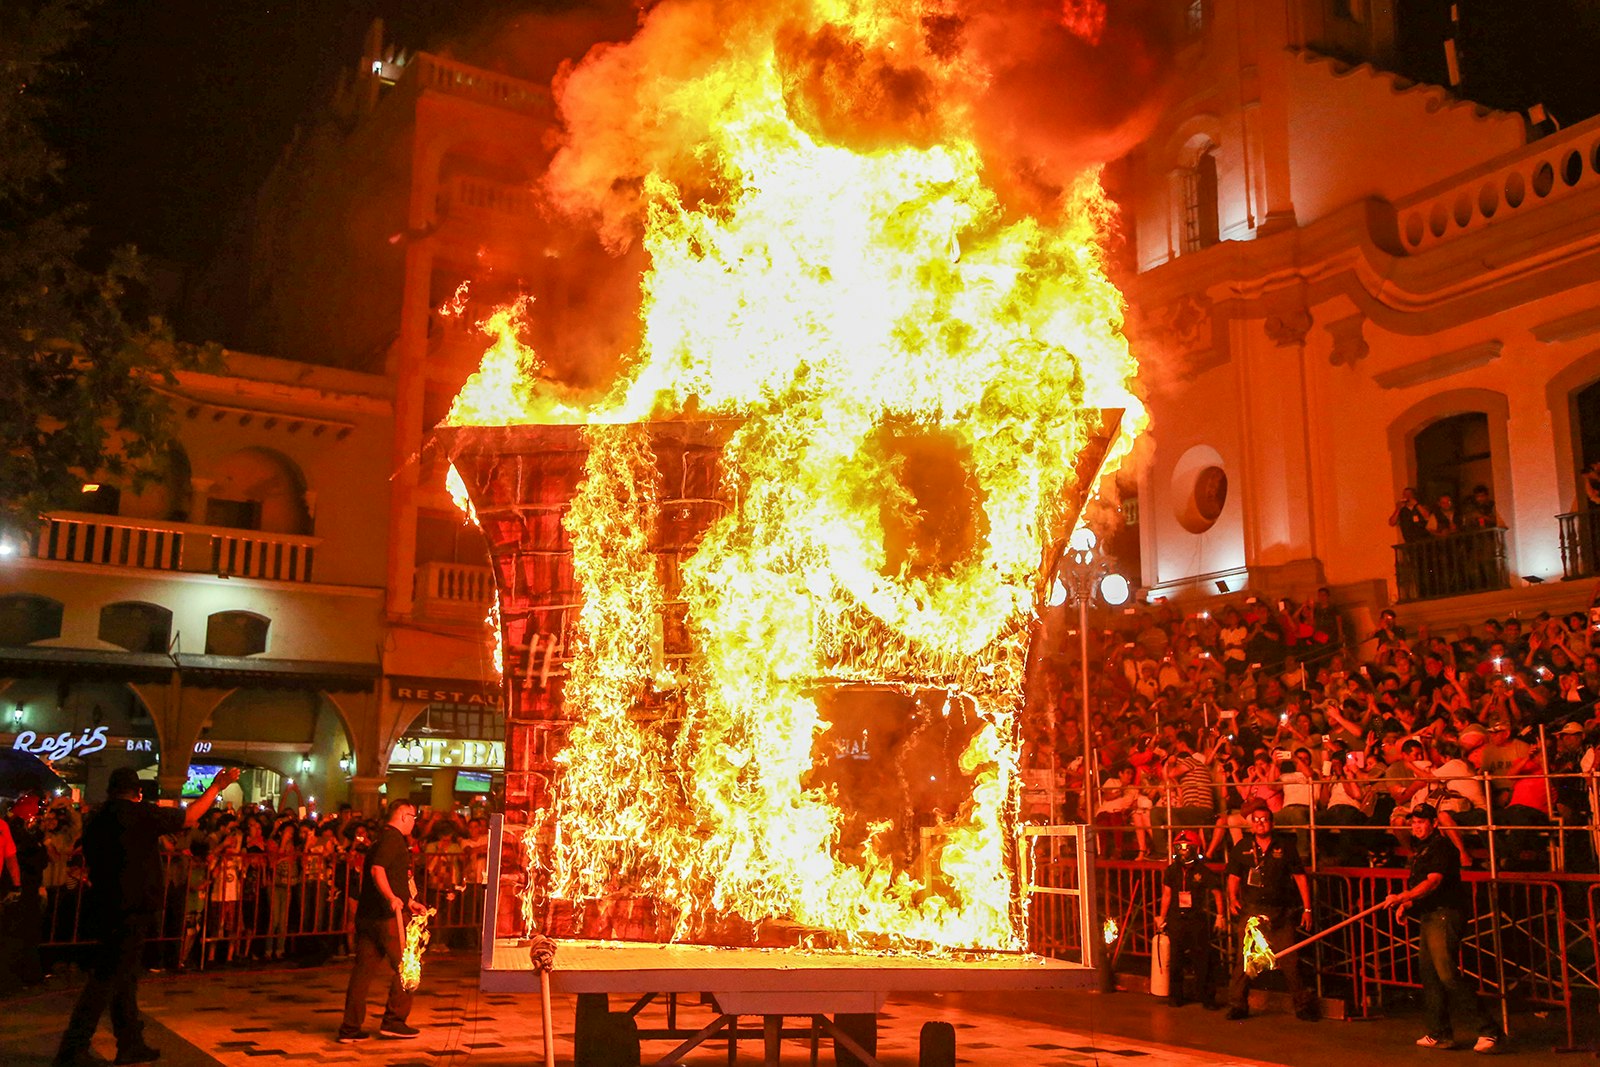 A large effigy is completely engulfed in flames as a large group of people look on 